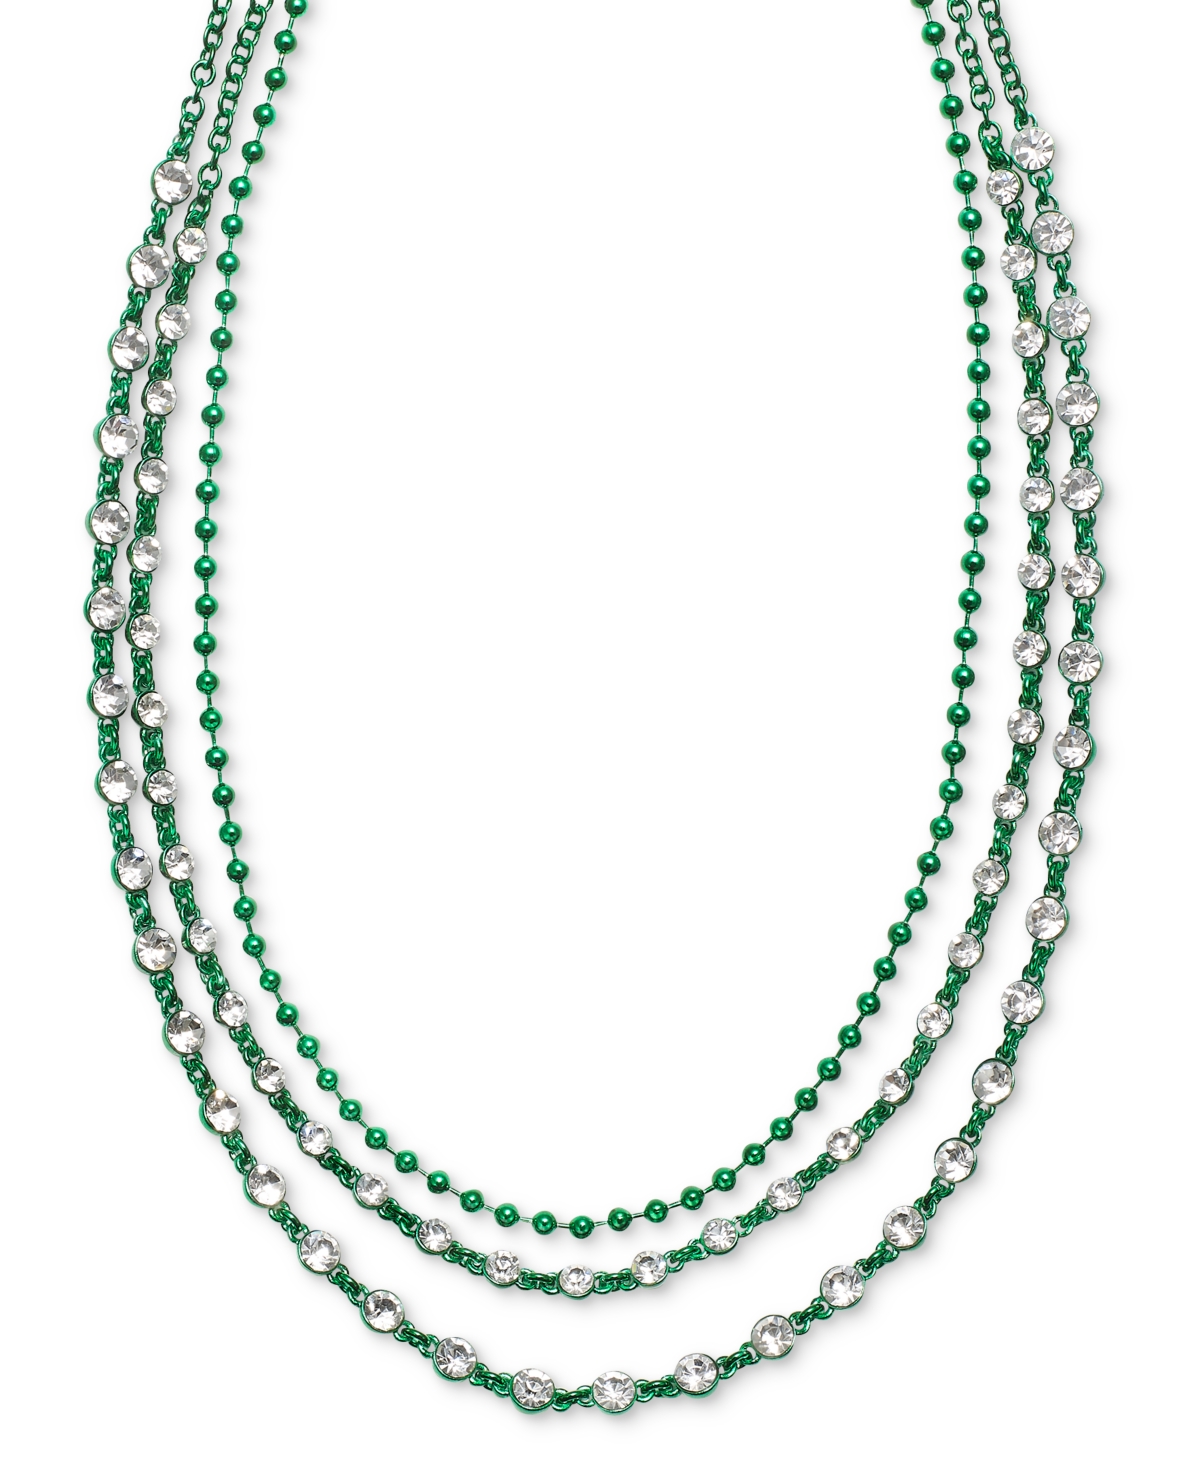 Holiday Lane Crystal & Bead Layered Collar Necklace, 17" + 3" Extender, Created For Macy's In Green